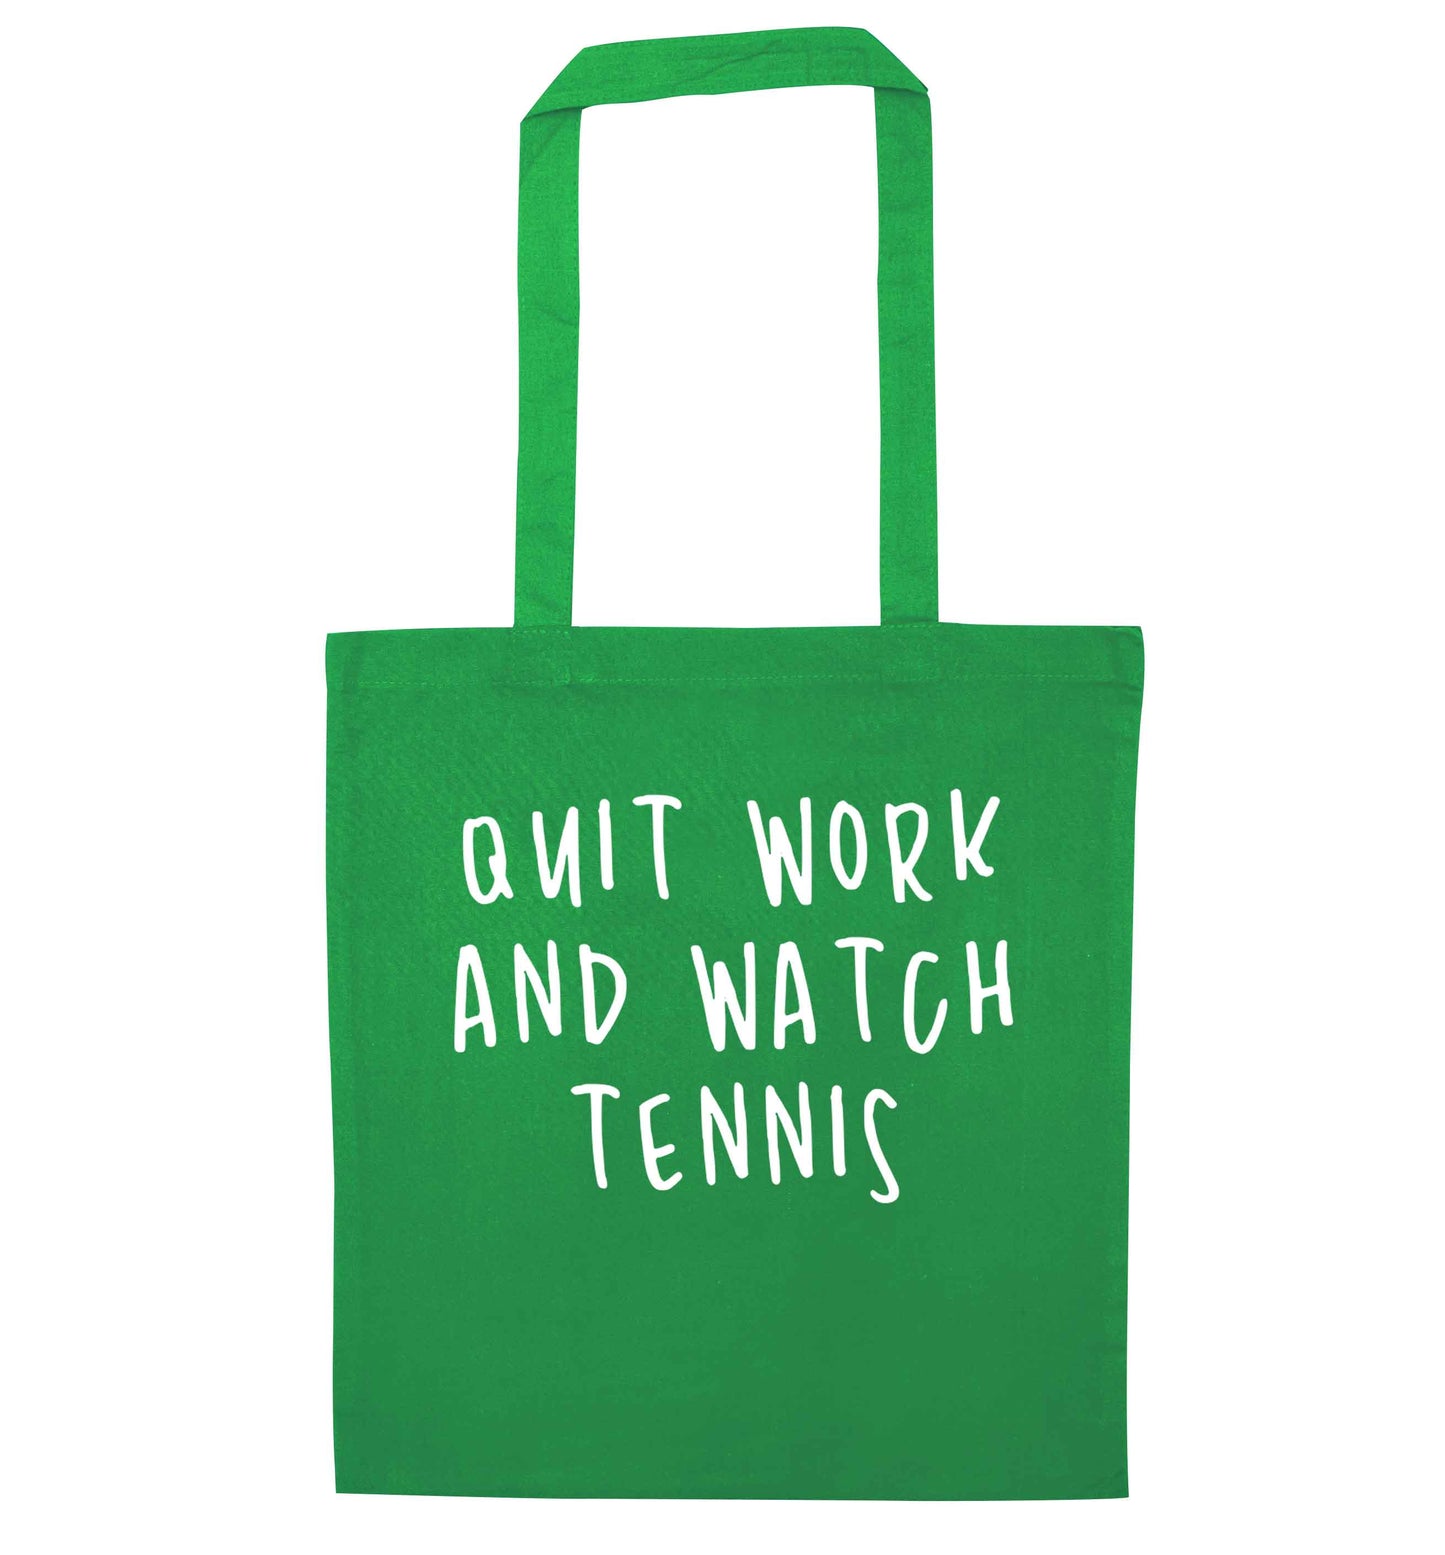 Quit work and watch tennis green tote bag